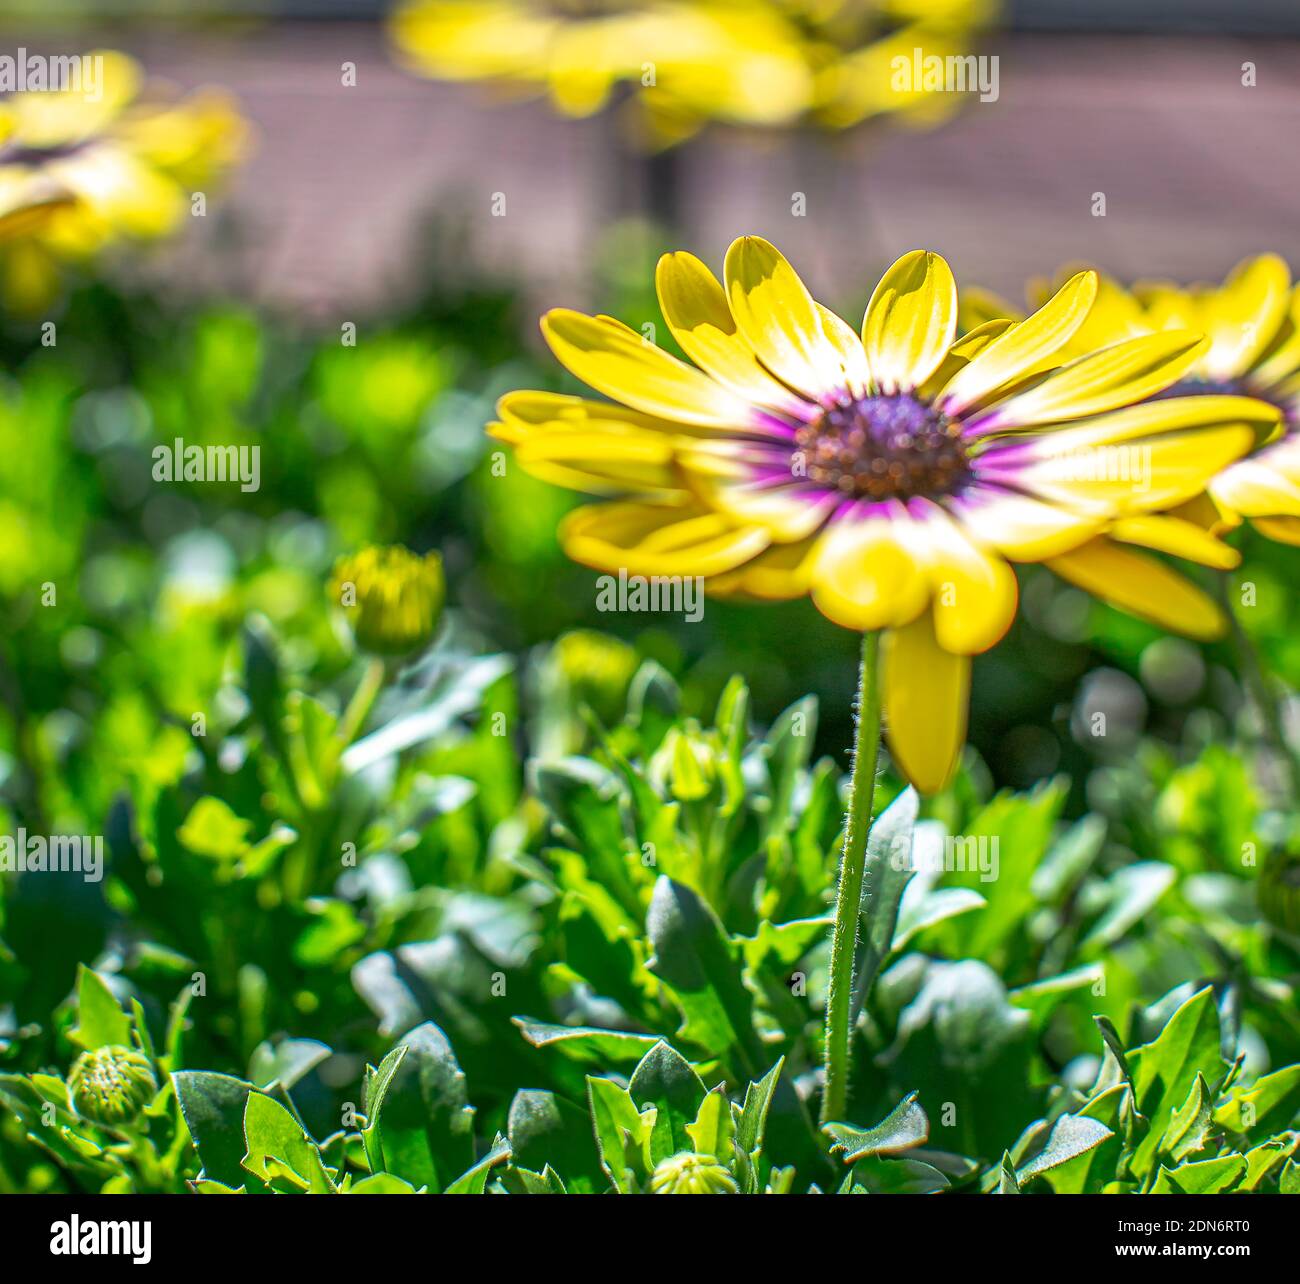 Close-up Of Yellow Flowering Plant Stock Photo